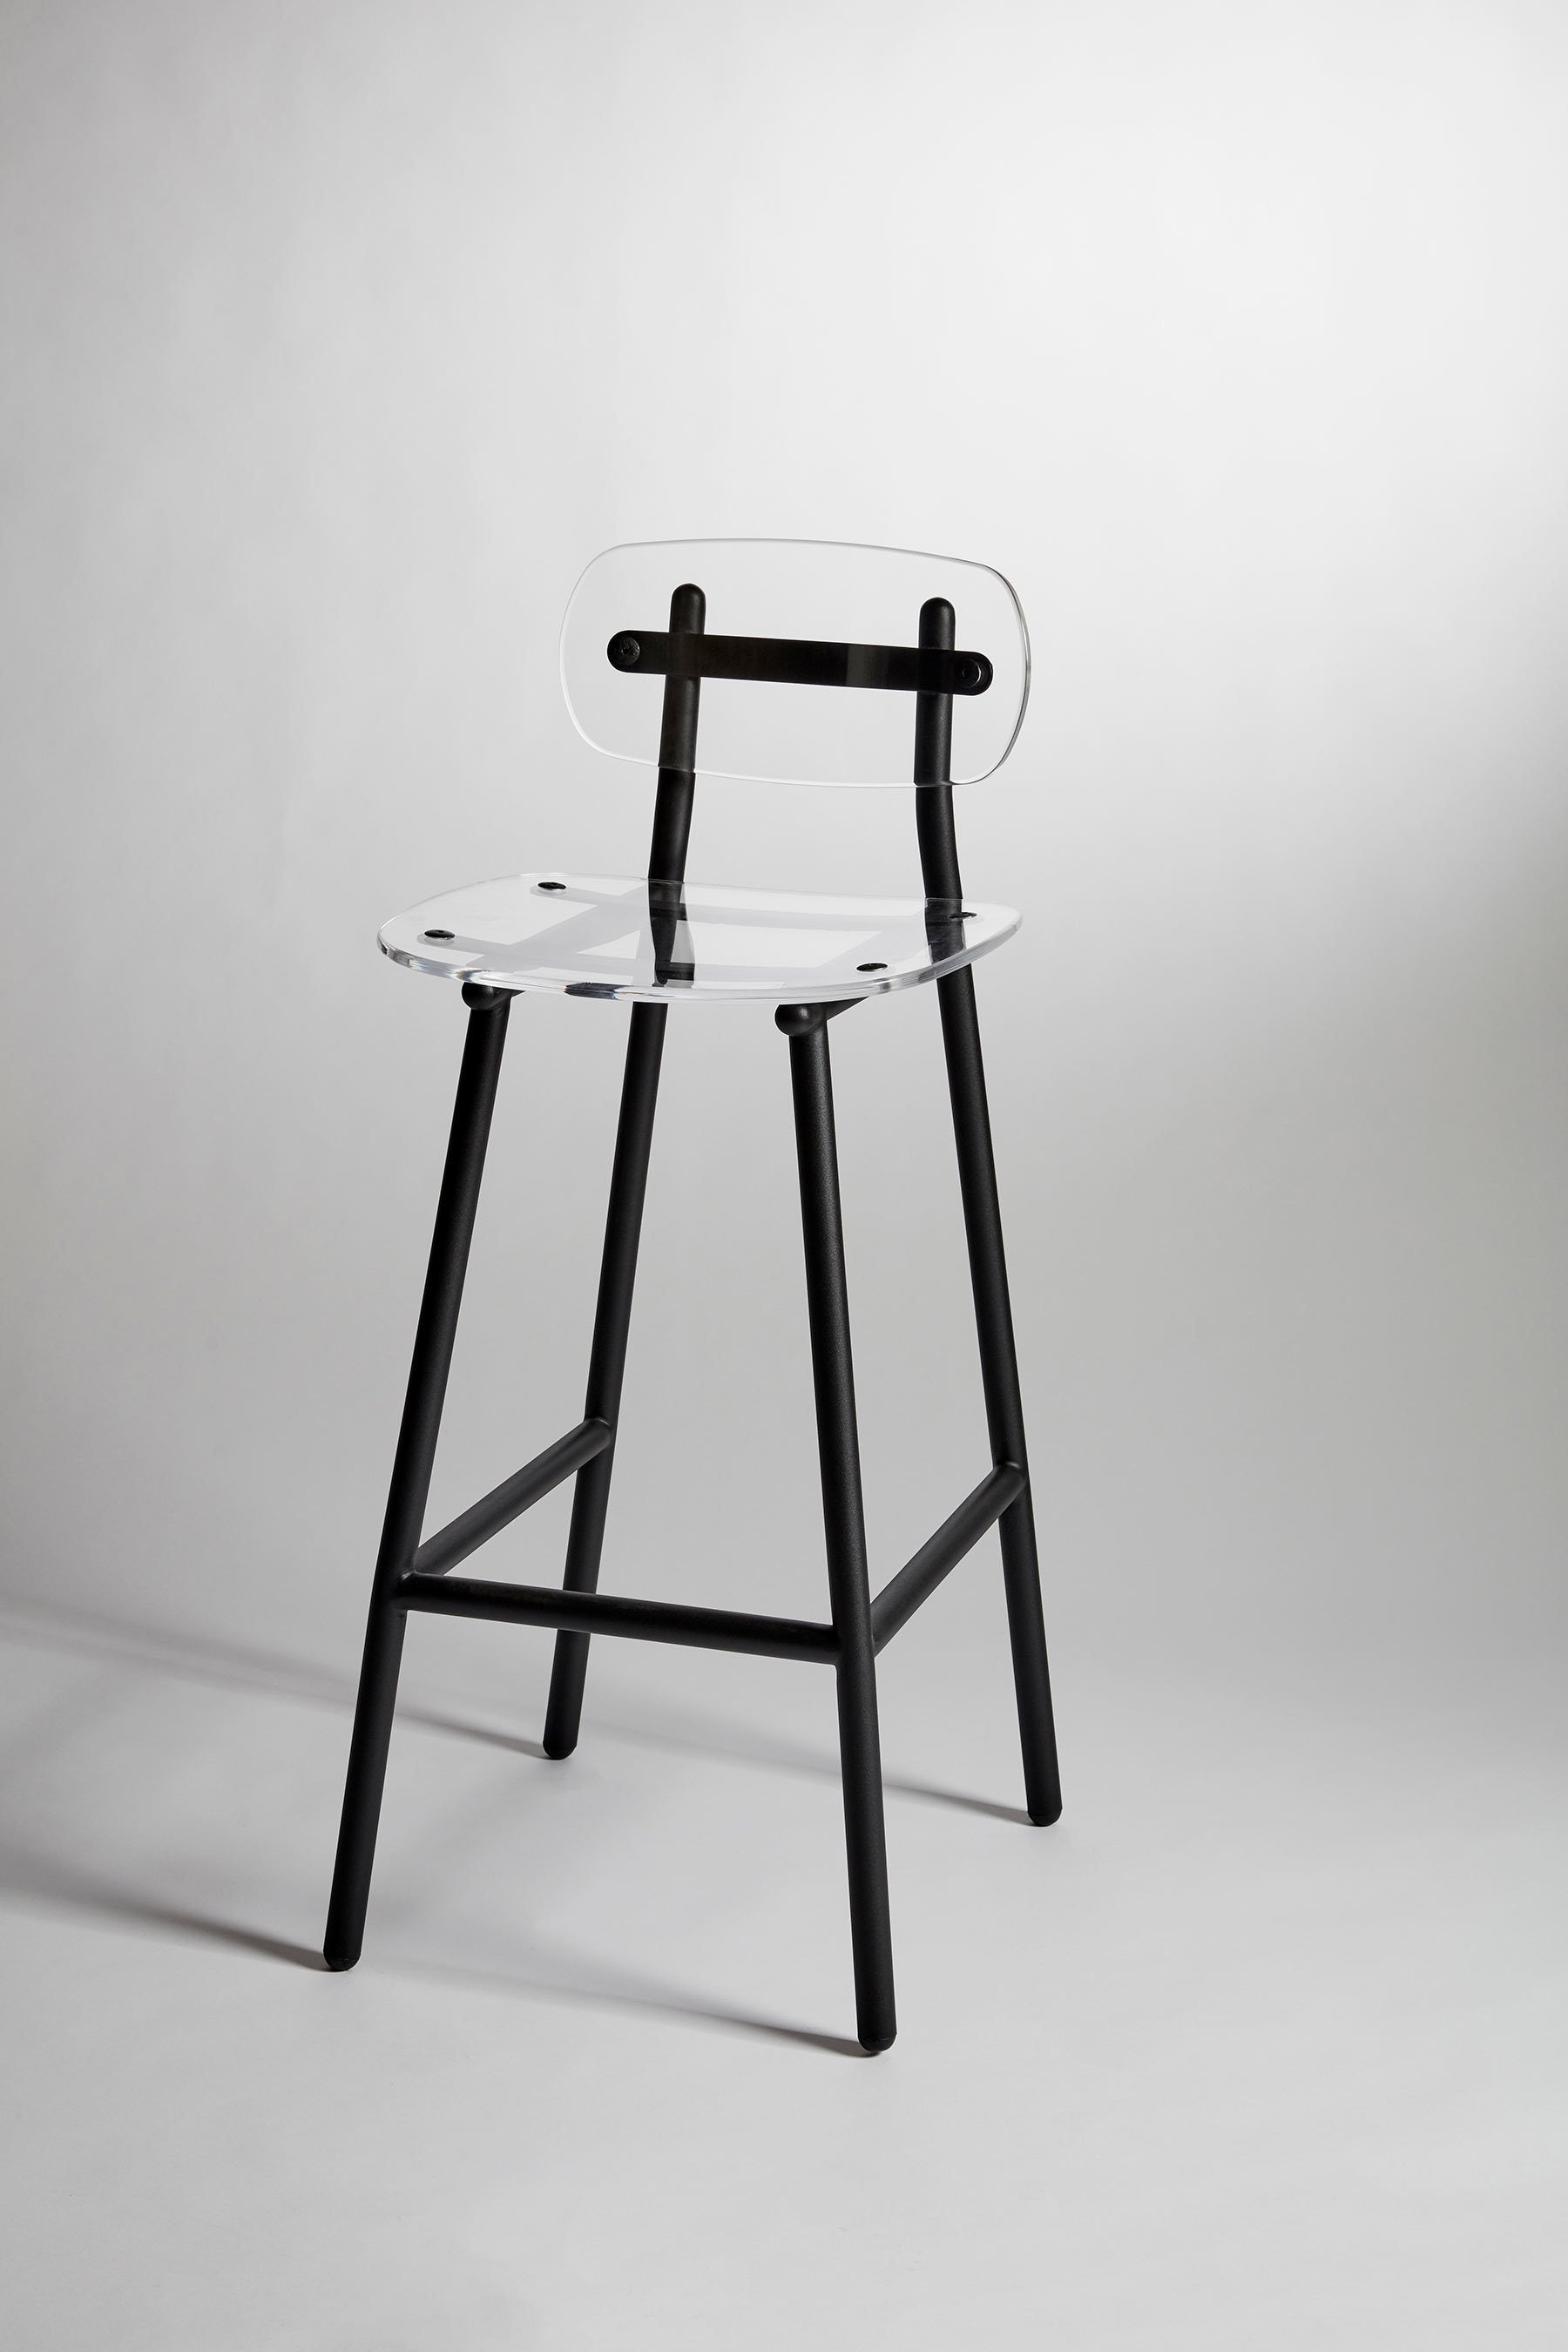 Fenster Bar Chair | Clear Acrylic & Black Stainless Steel Indoor Outdoor Seating | GibsonKarlo | DesignByThem